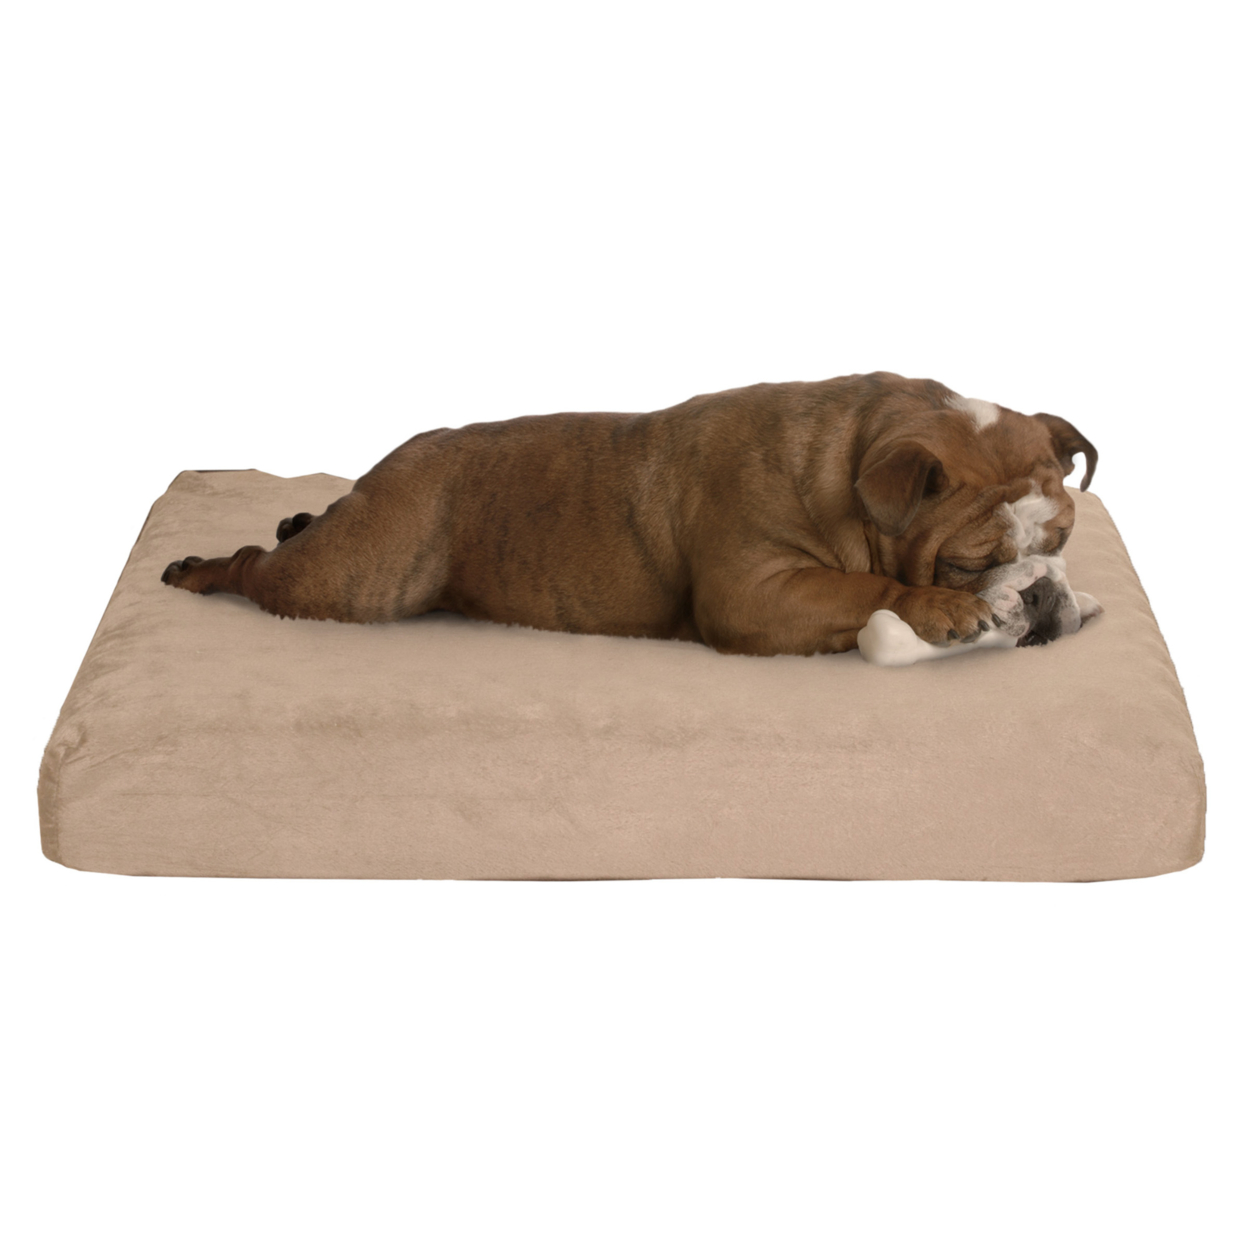 PETMAKER Medium Memory Foam Dog Bed With Removable Cover